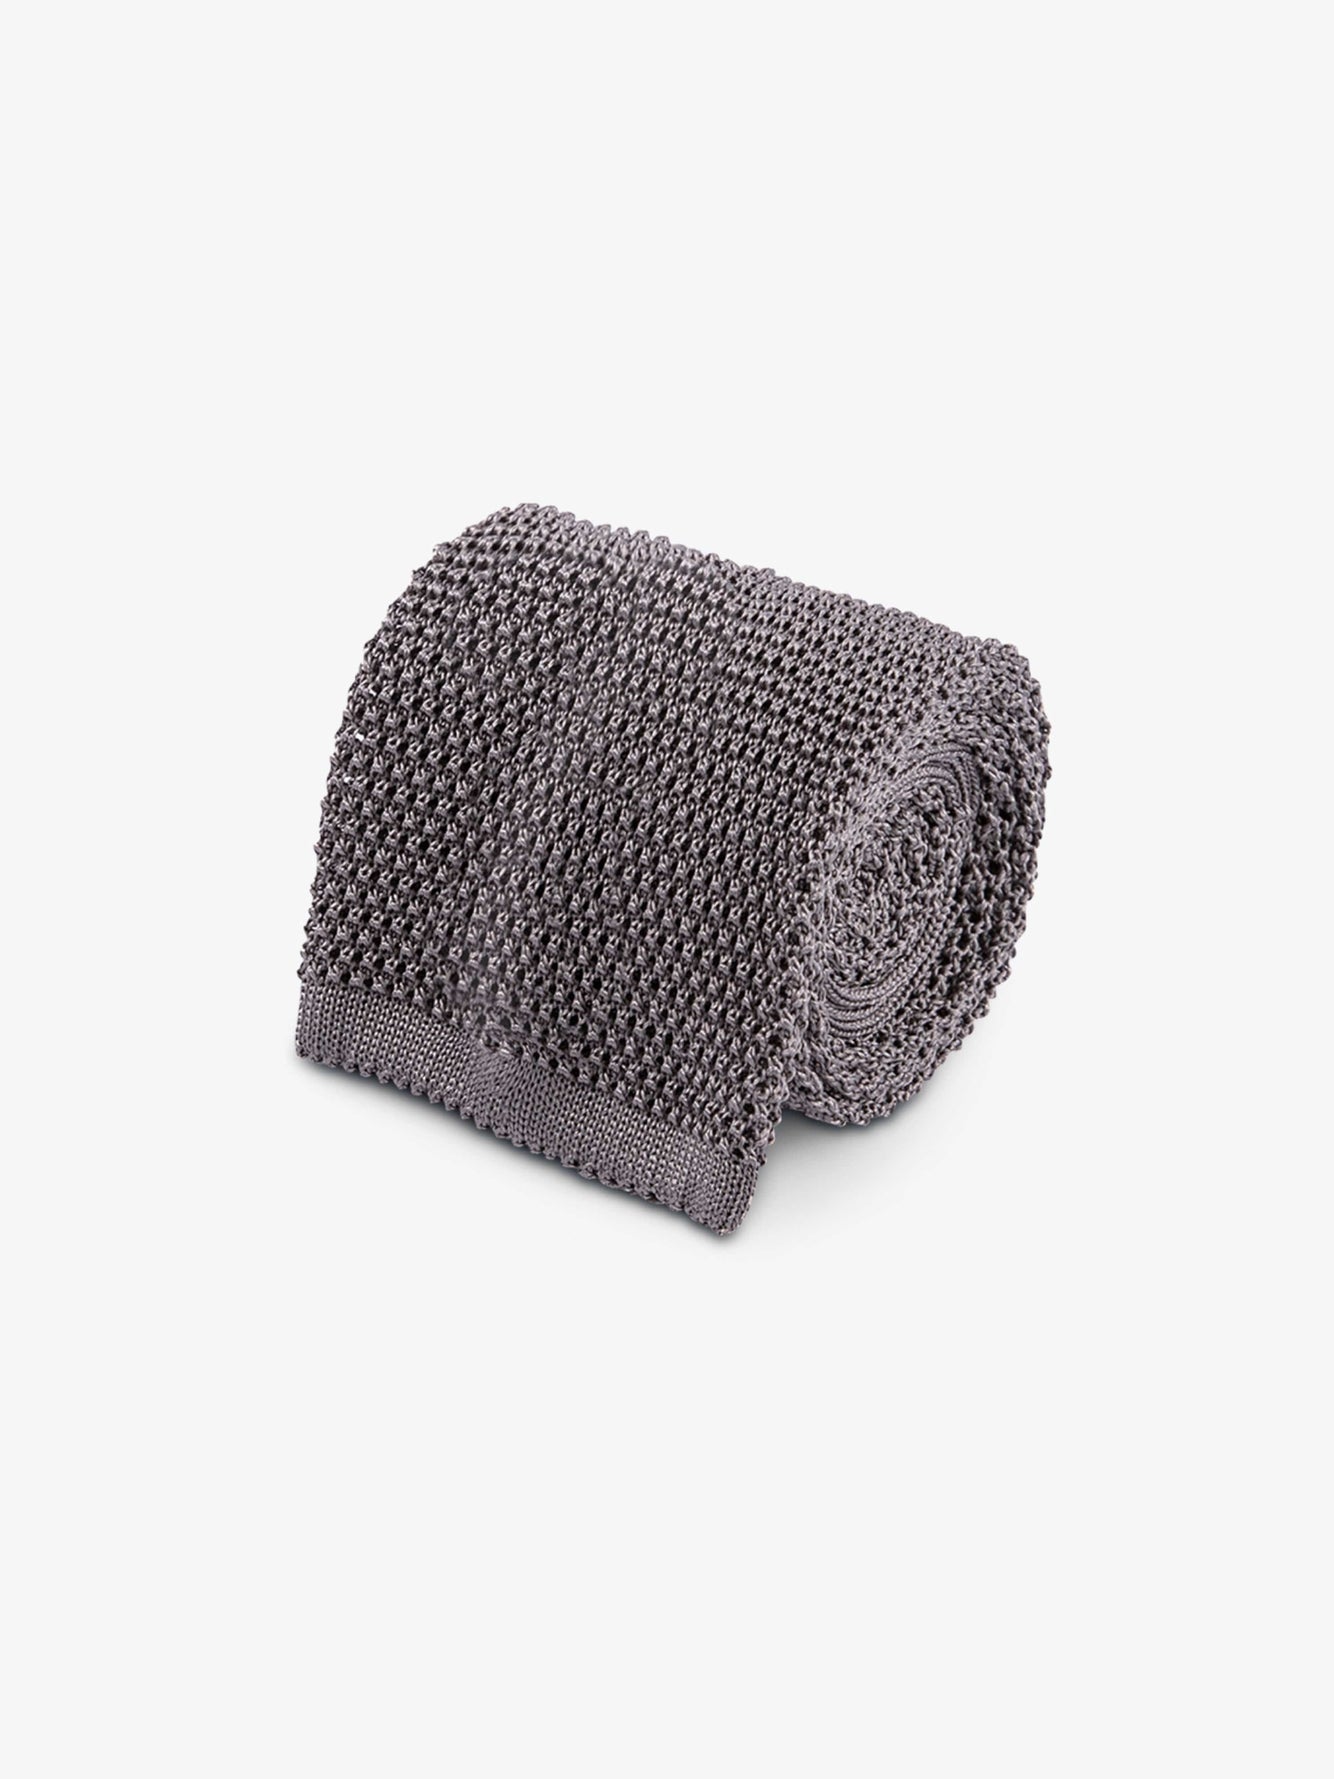 Grey Knitted Tie - Grand Le Mar